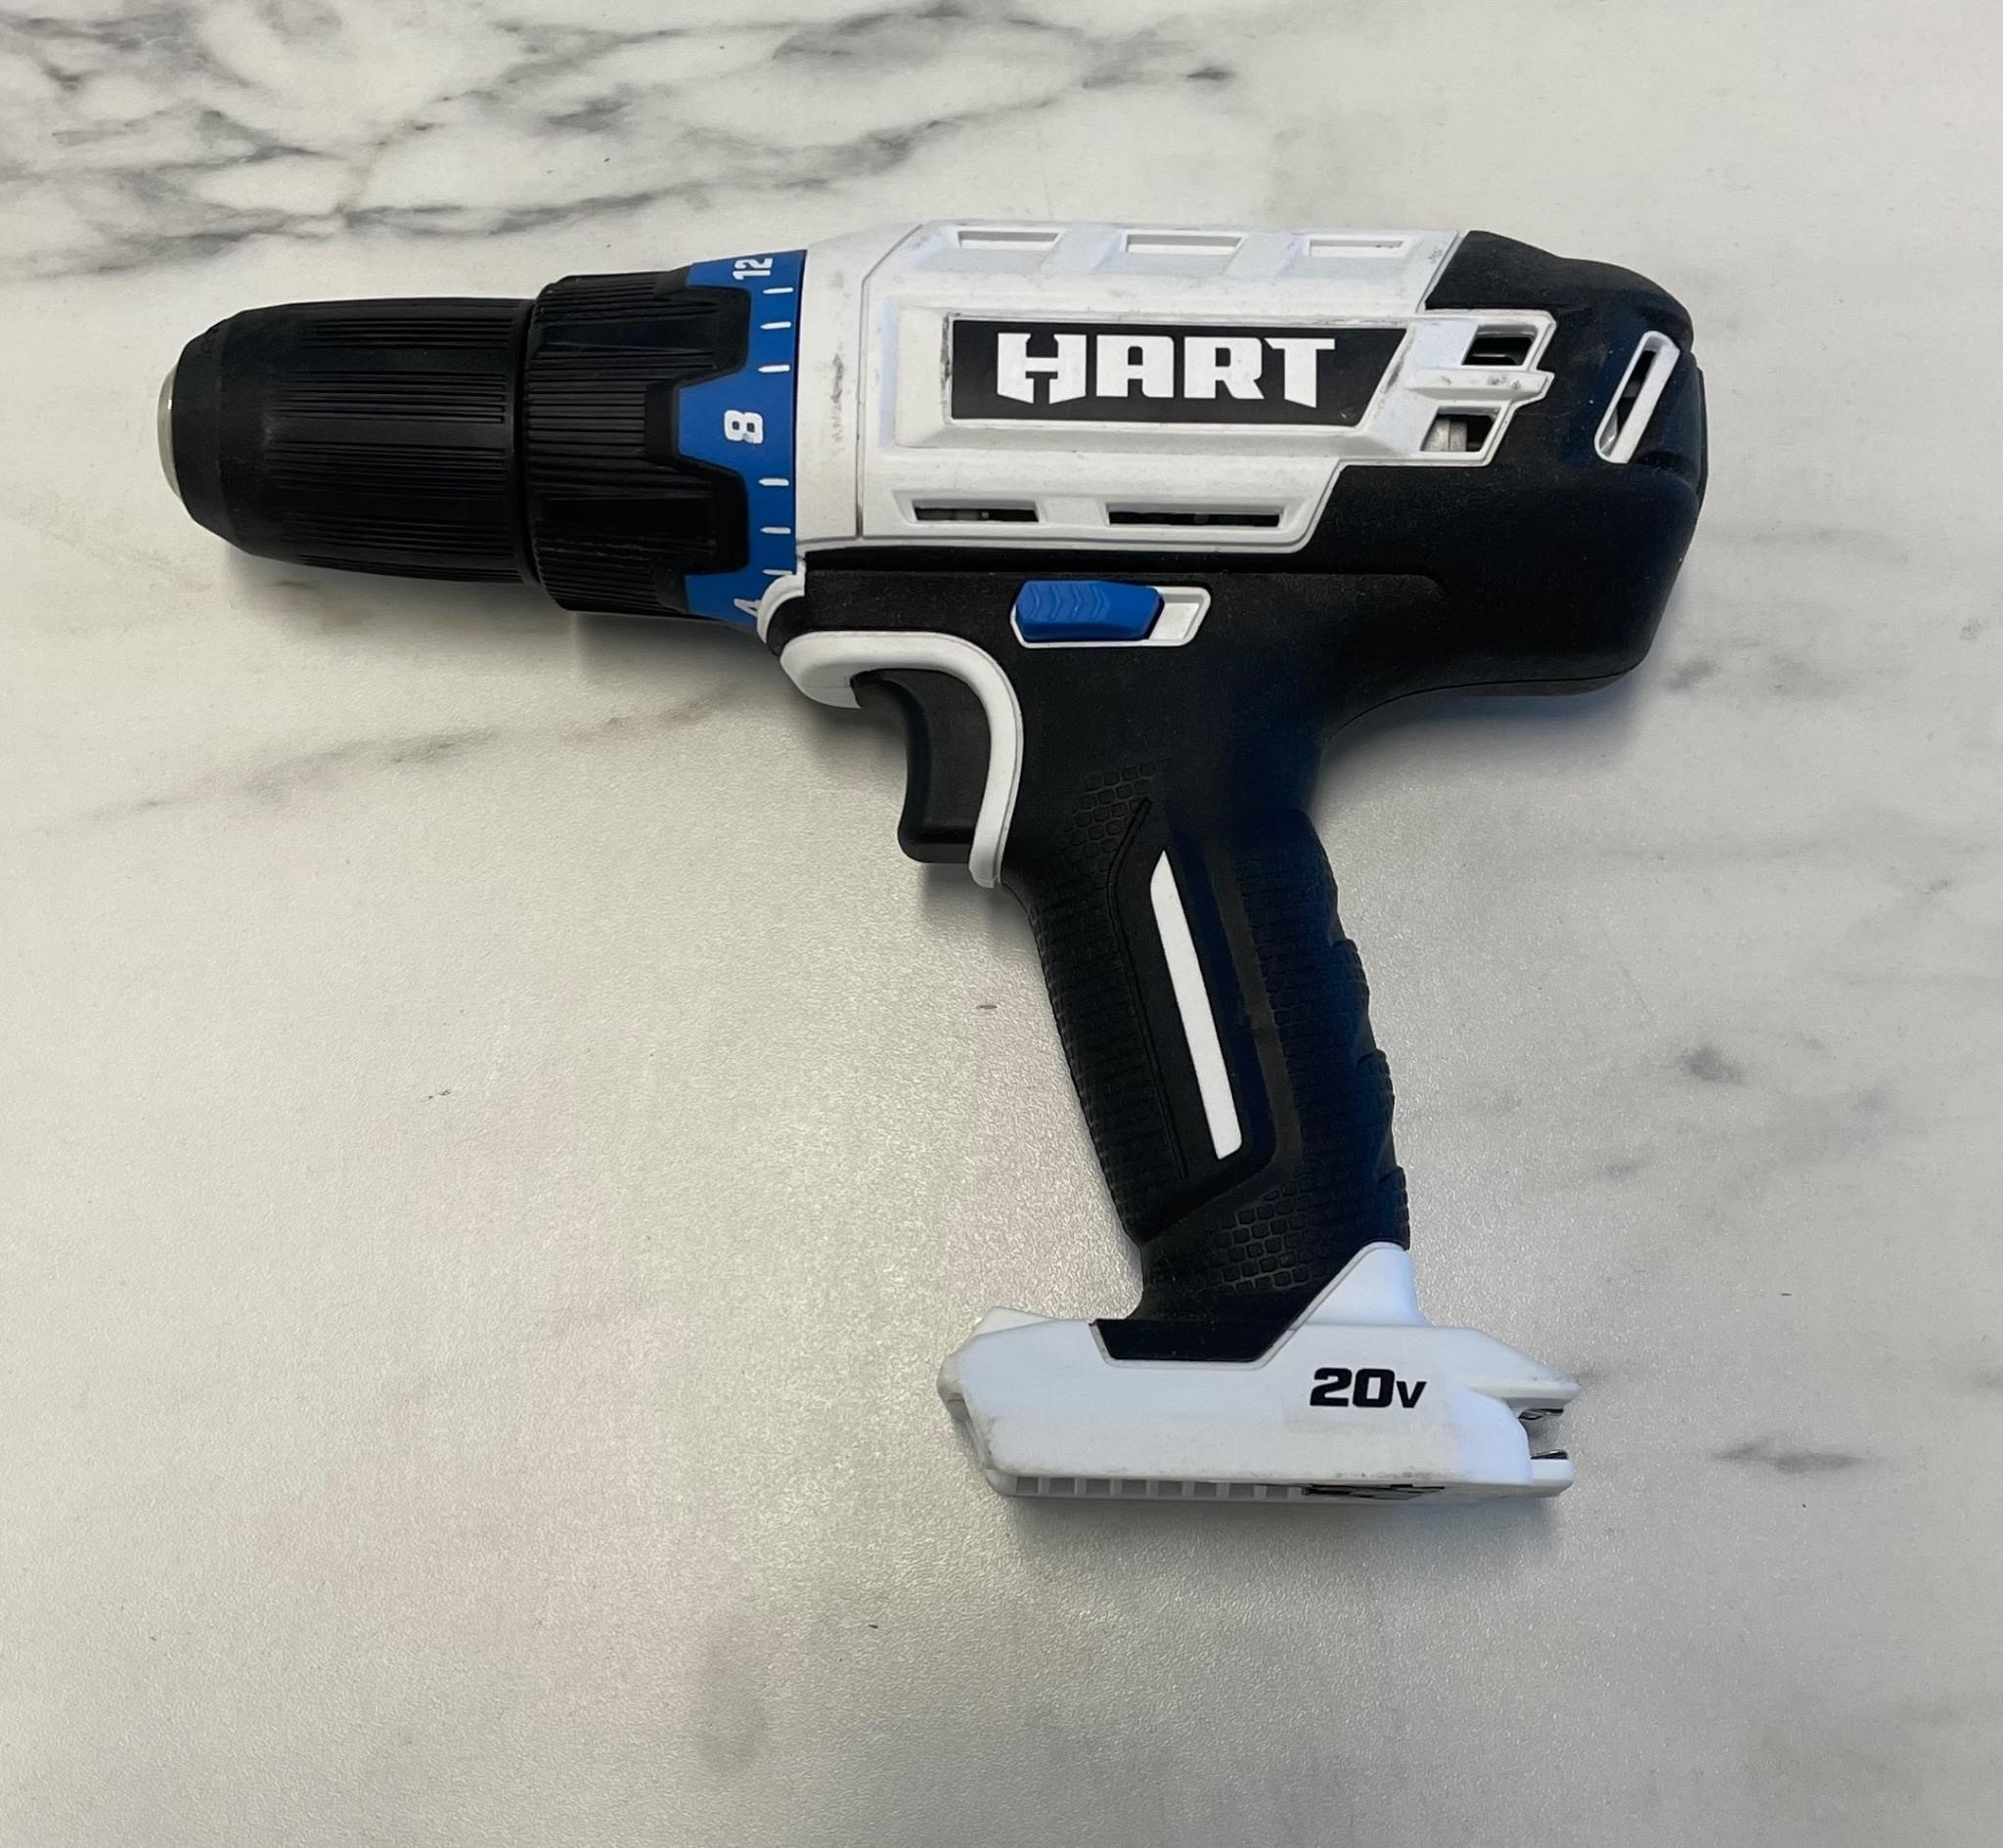 *TOOL ONLY* HART 20-Volt Cordless 1/2-inch Drill